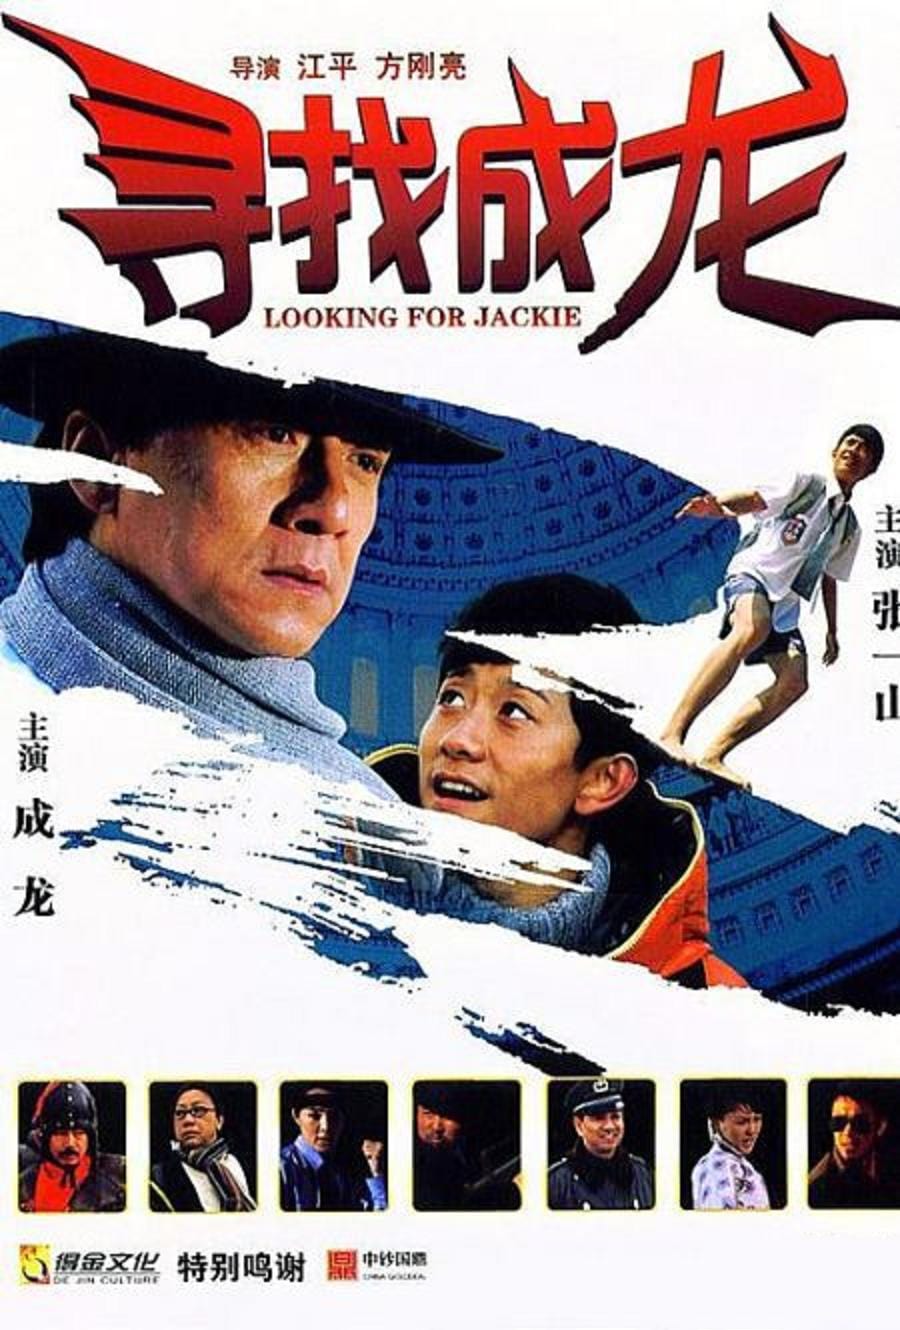 EN - Kung Fu Master, Looking For Jackie (2009) JACKIE CHAN (ENG-SUB)